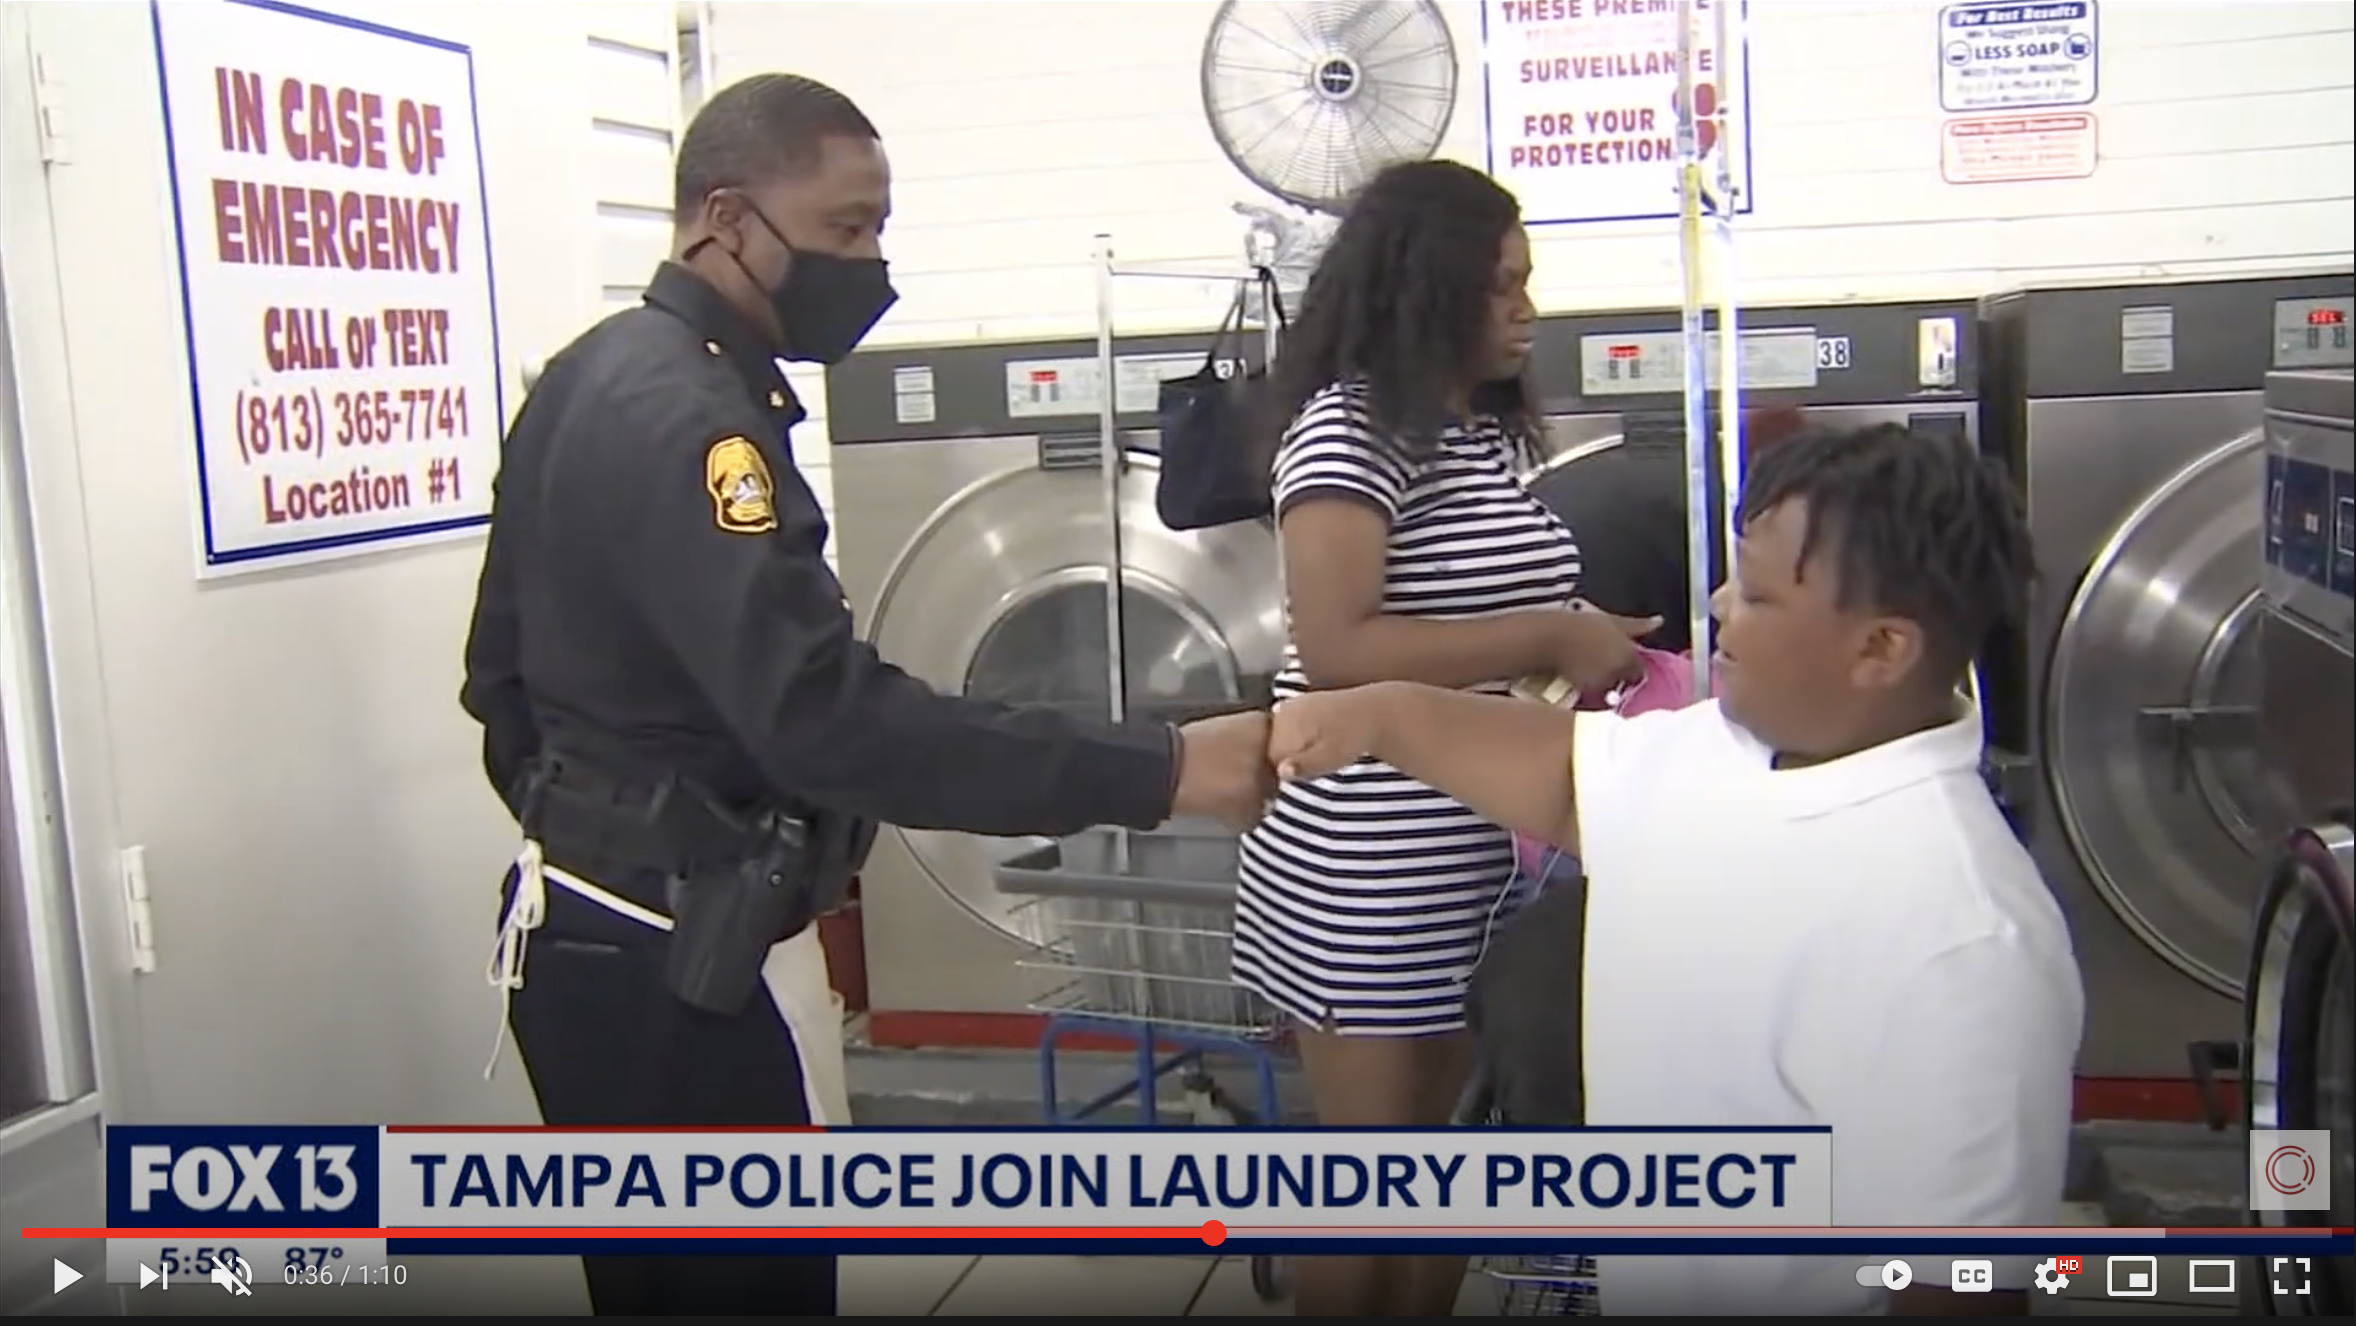 Fox 13 Tampa Bay – TPD x Laundry Project Story